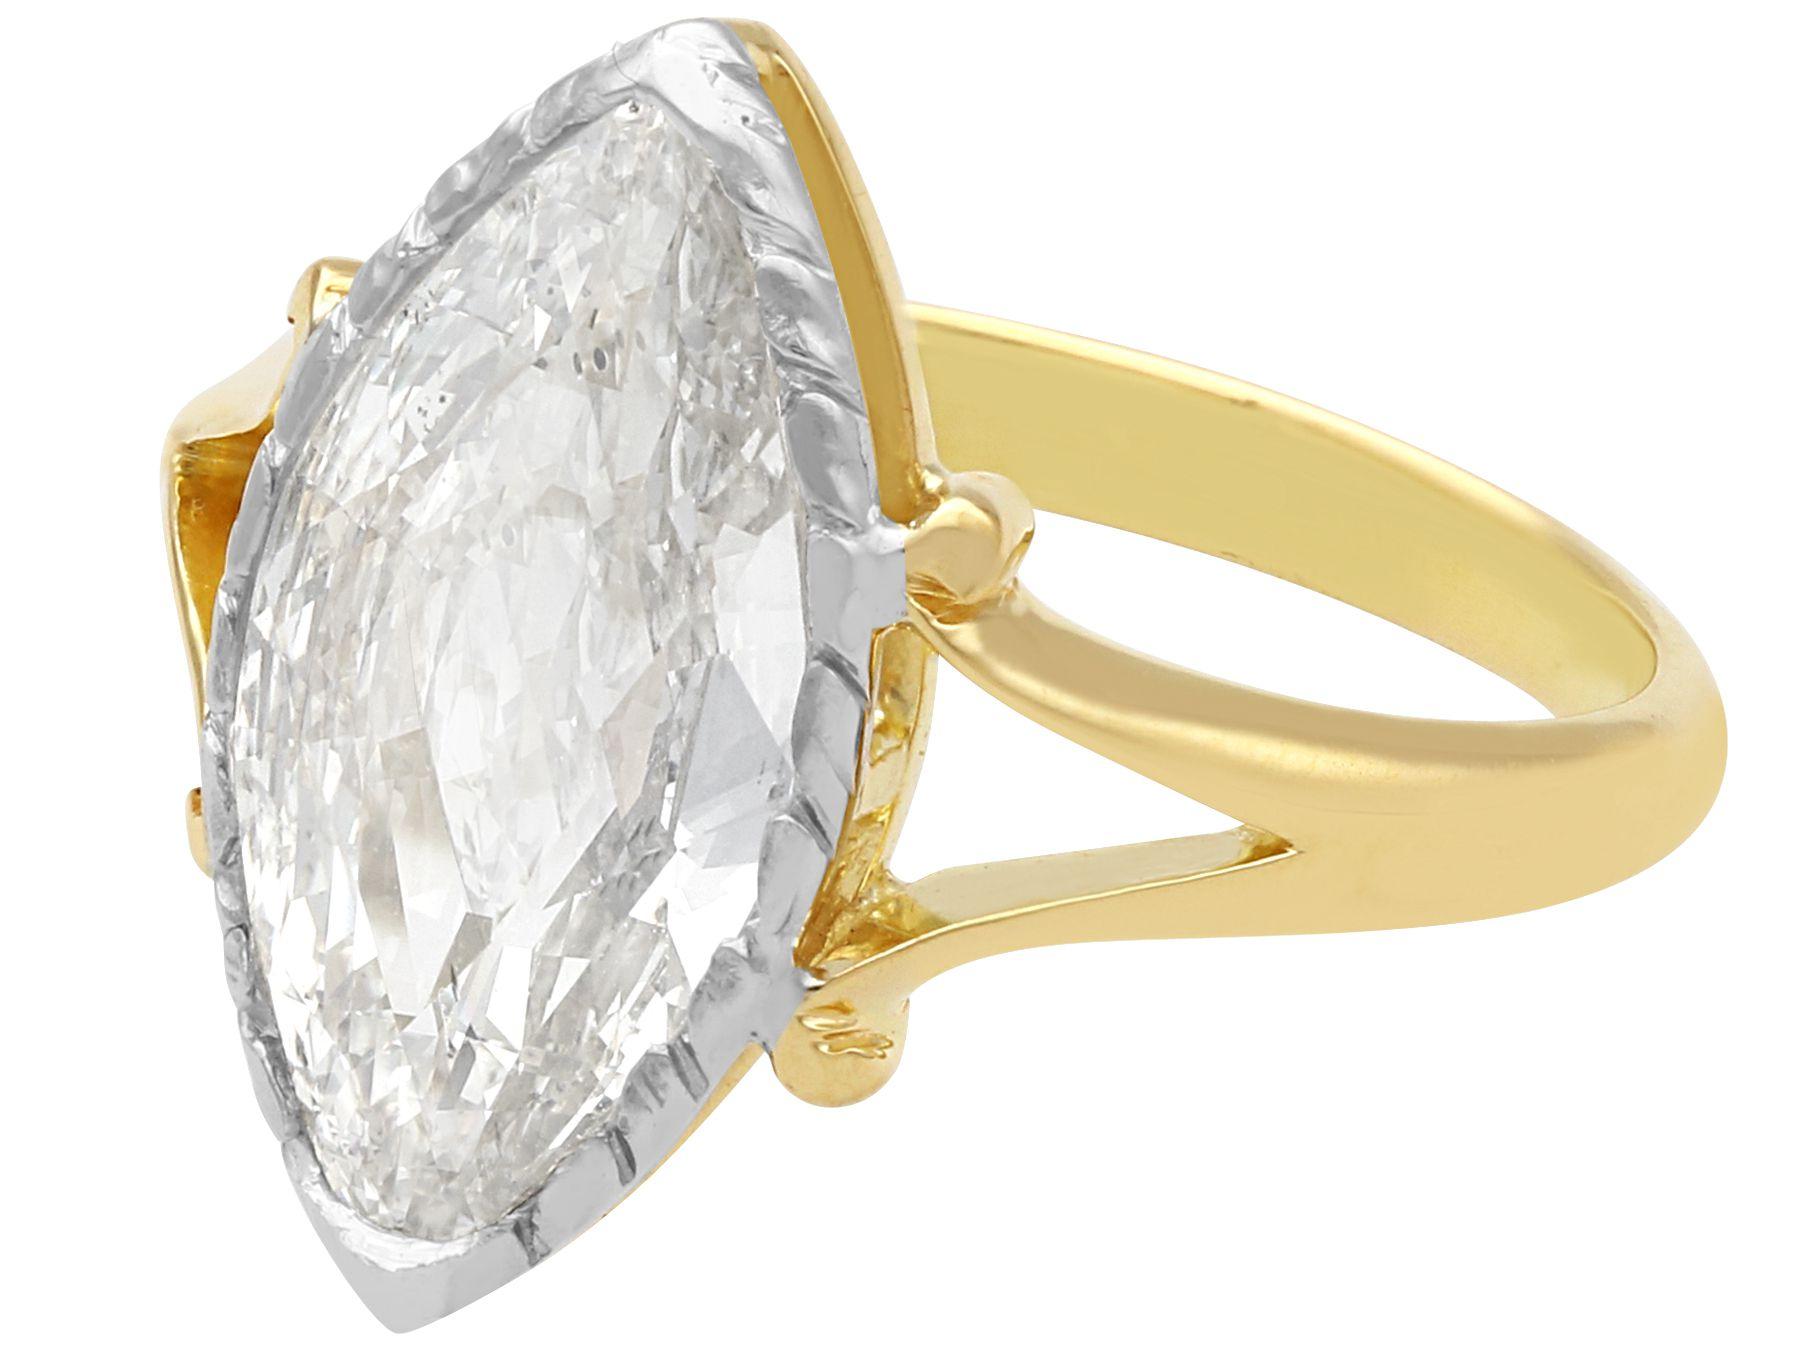 A stunning antique 1900's 2.35 carat diamond and 18 karat yellow gold, platinum set solitaire ring; part of our diverse antique jewelry and estate jewelry collections.

This stunning, fine and impressive antique engagement ring has been crafted in